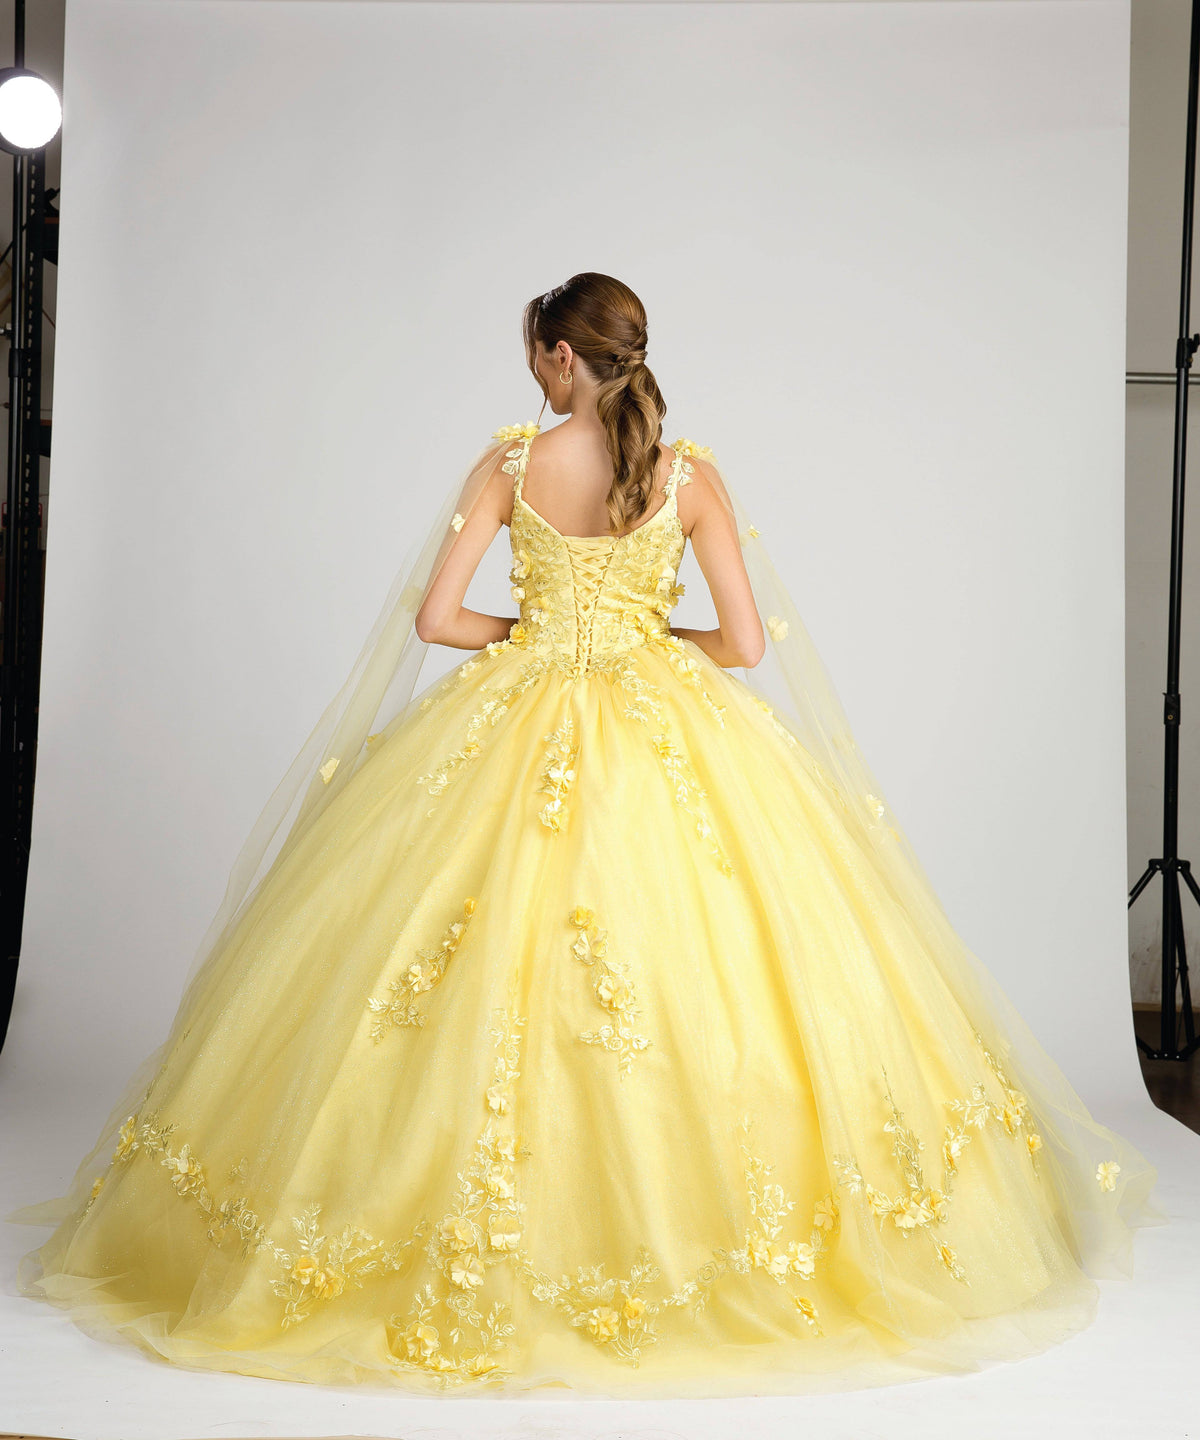 Fiesta 10286 Stunning Lace & Floral Embroidered Ball Gown - NORMA REED